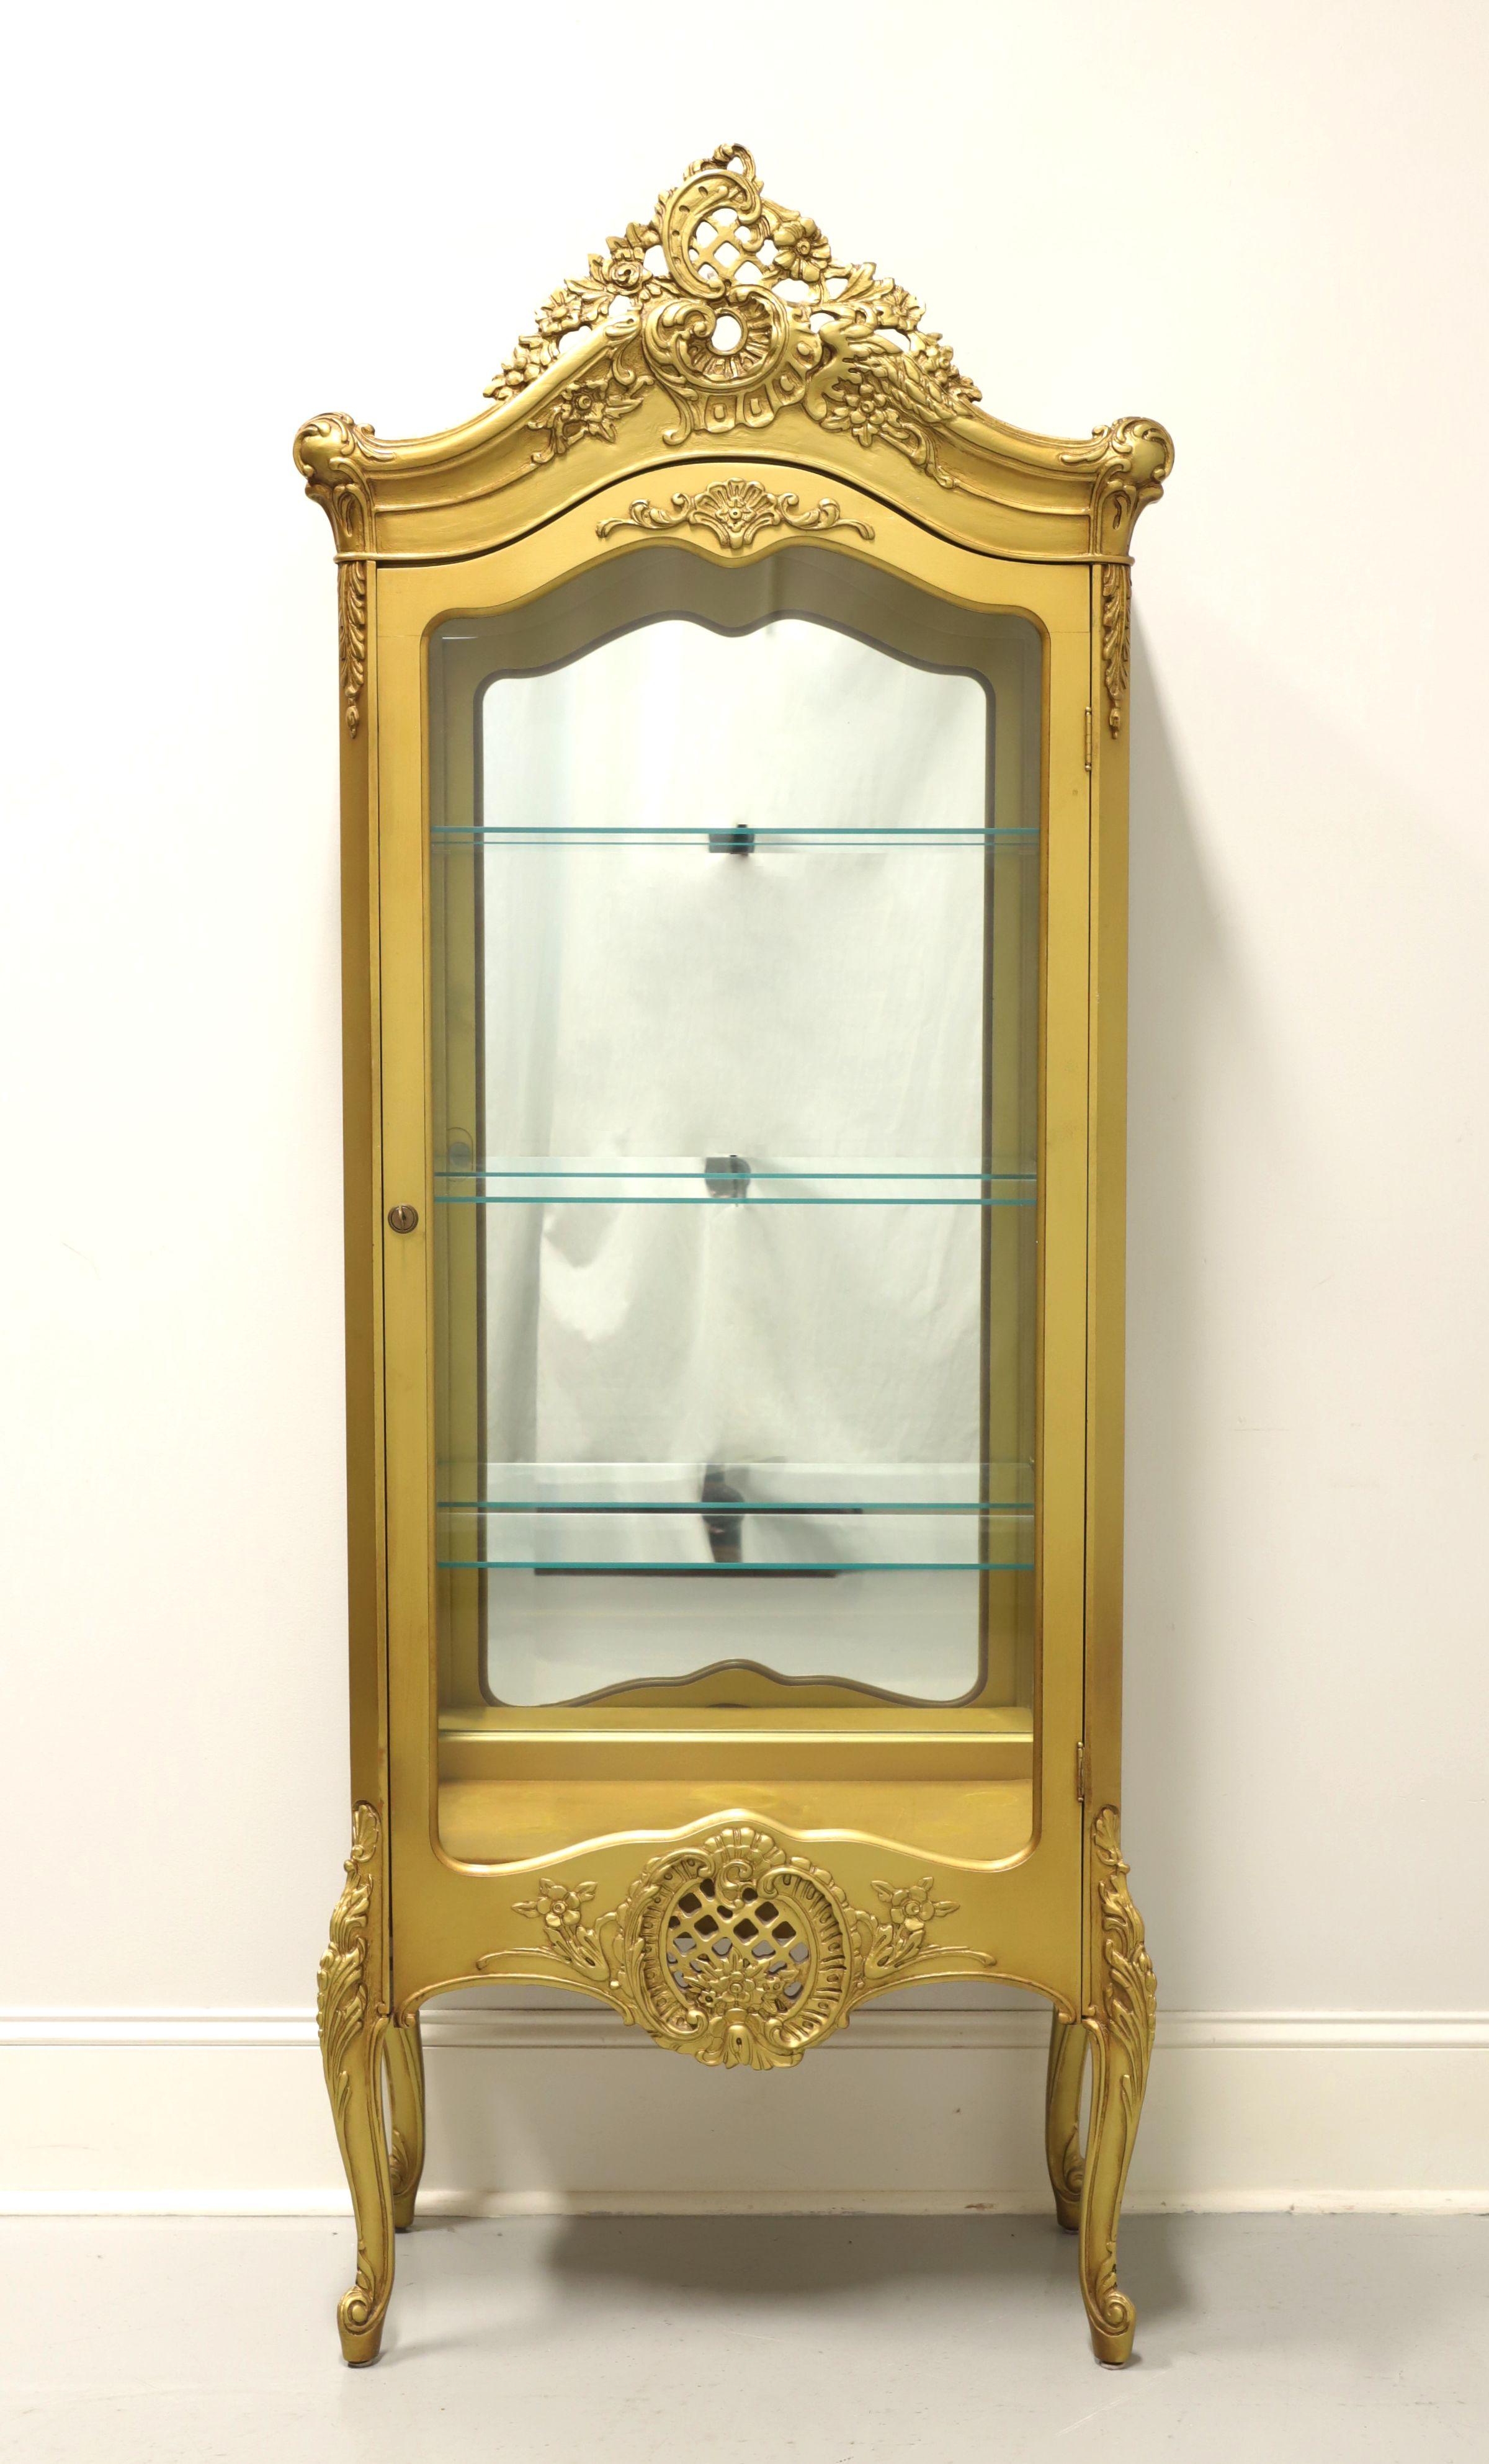 A French Country style vitrine, unbranded. Solid hardwood cabinet painted gold, brass lock hardware, elaborately carved top with center crest, glass side panels, elaborately carved apron, elevated on curved legs with carved knees and scroll feet.